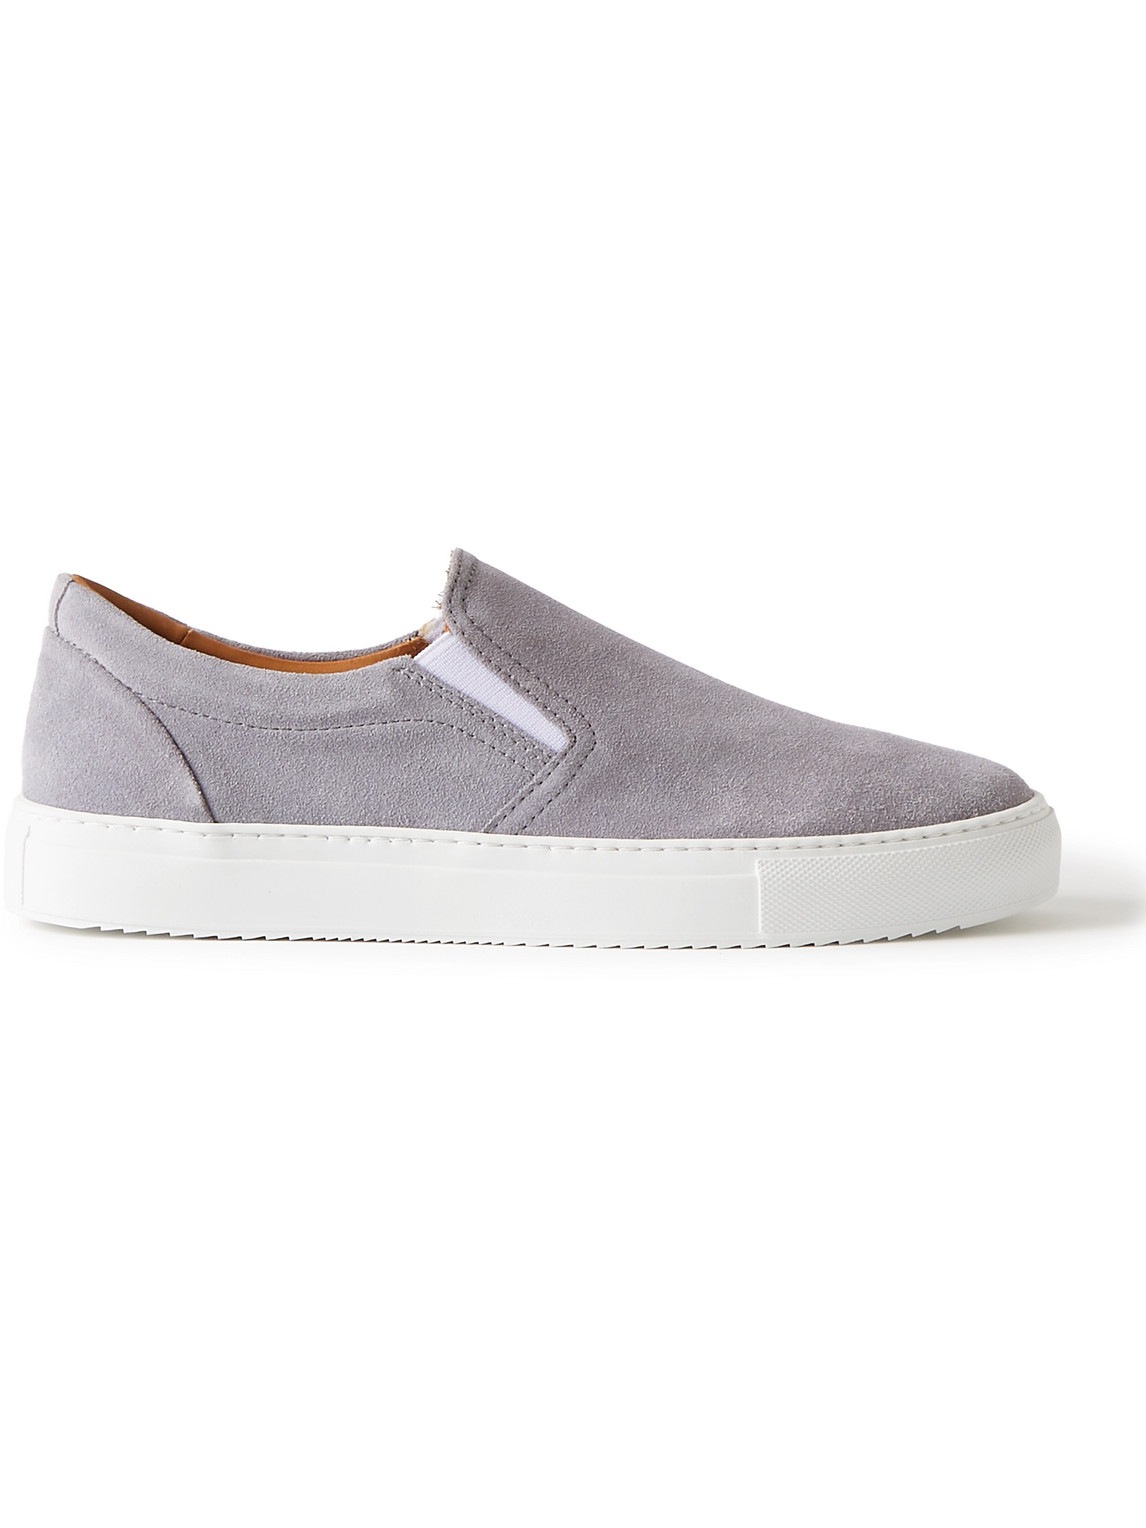 Regenerated Suede by evolo® Slip-On Sneakers